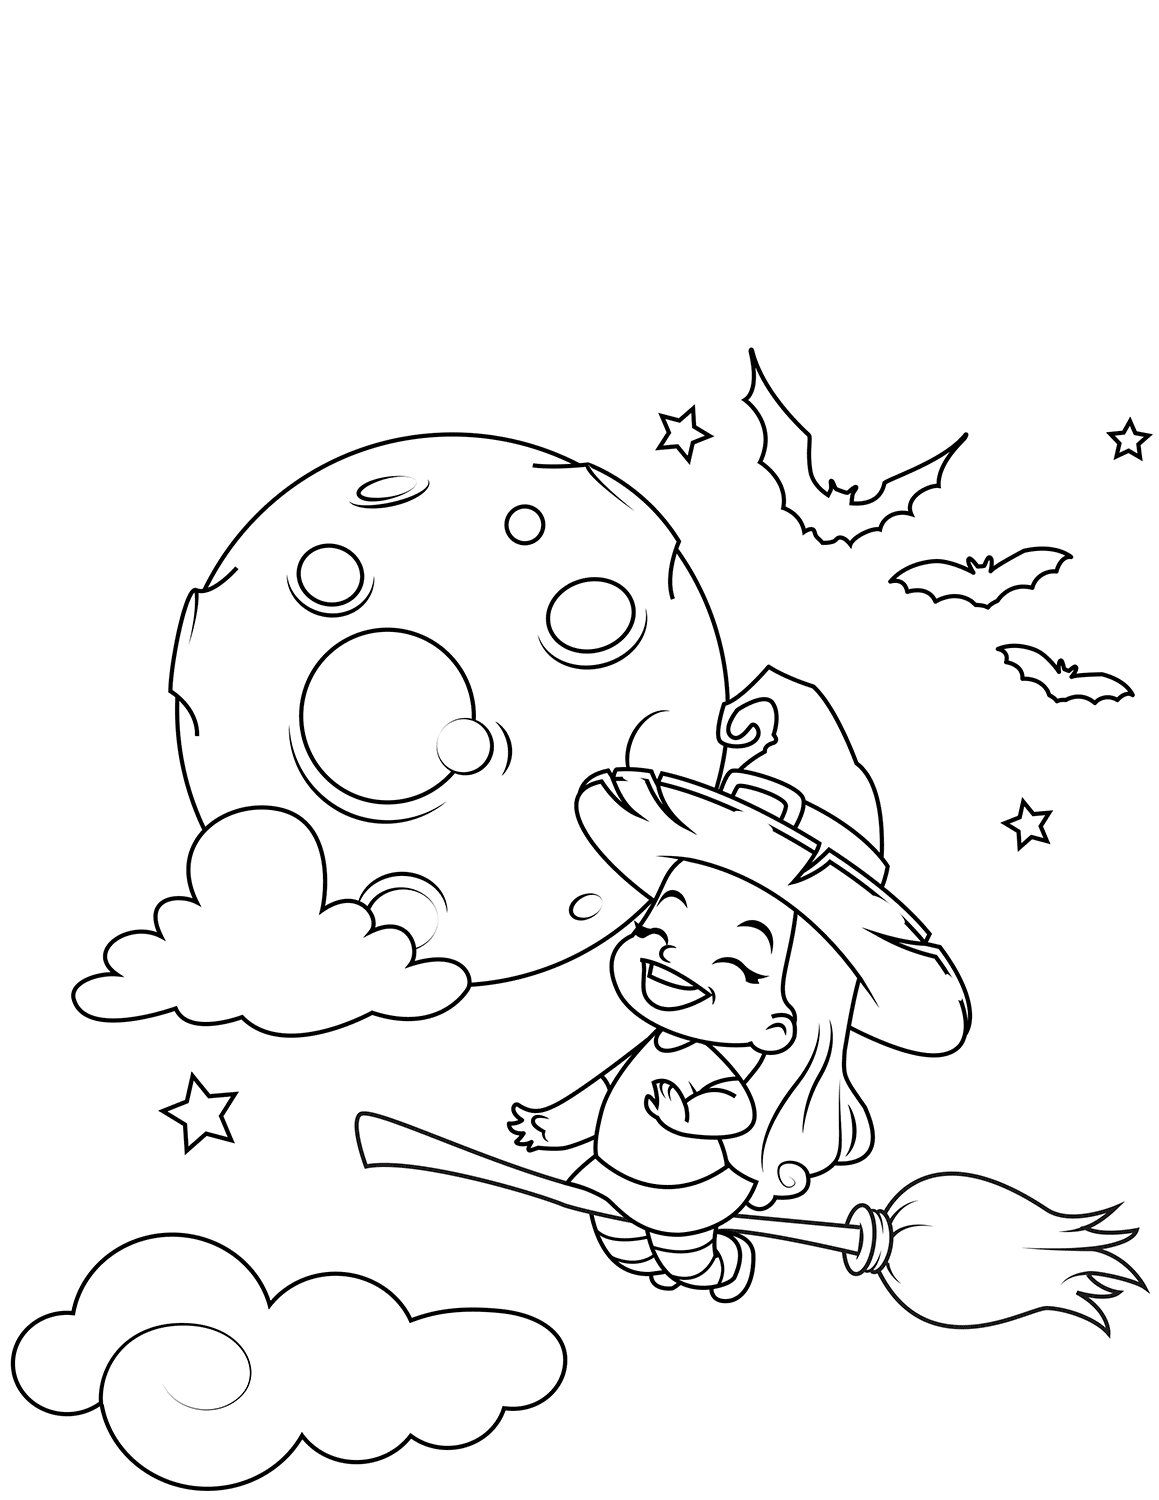 Cute Little Witch Flying On A Broomstick Halloween Coloring Page